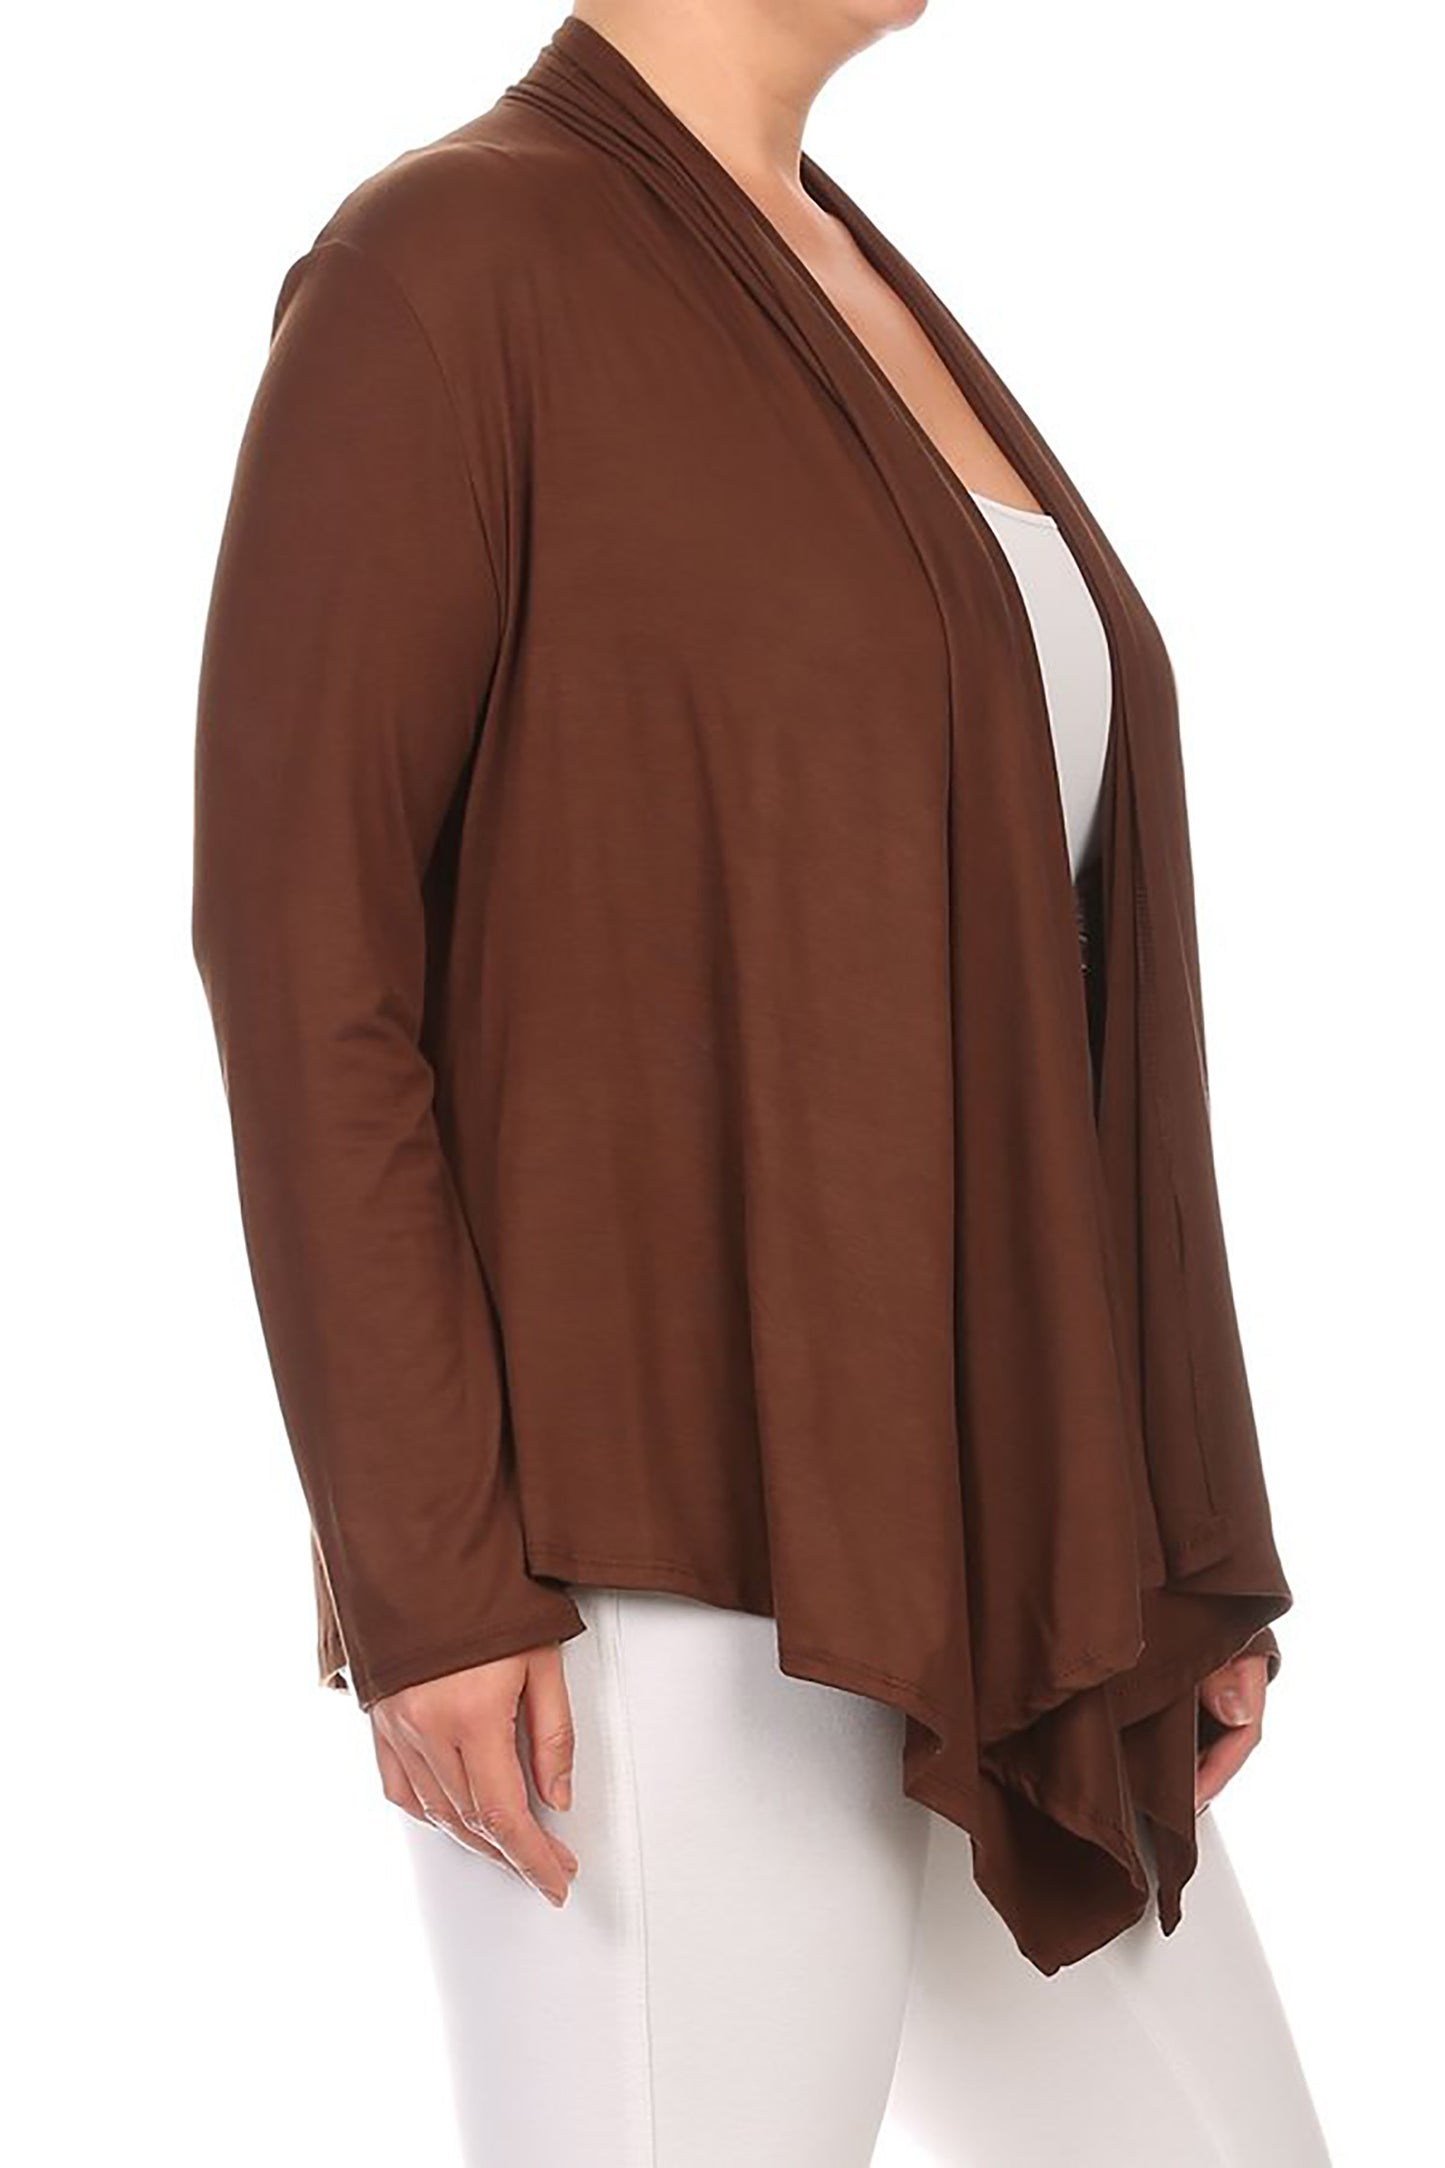 Women's Plus Size Long Sleeves Comfy Draped Open Front Solid Cardigan Made in USA